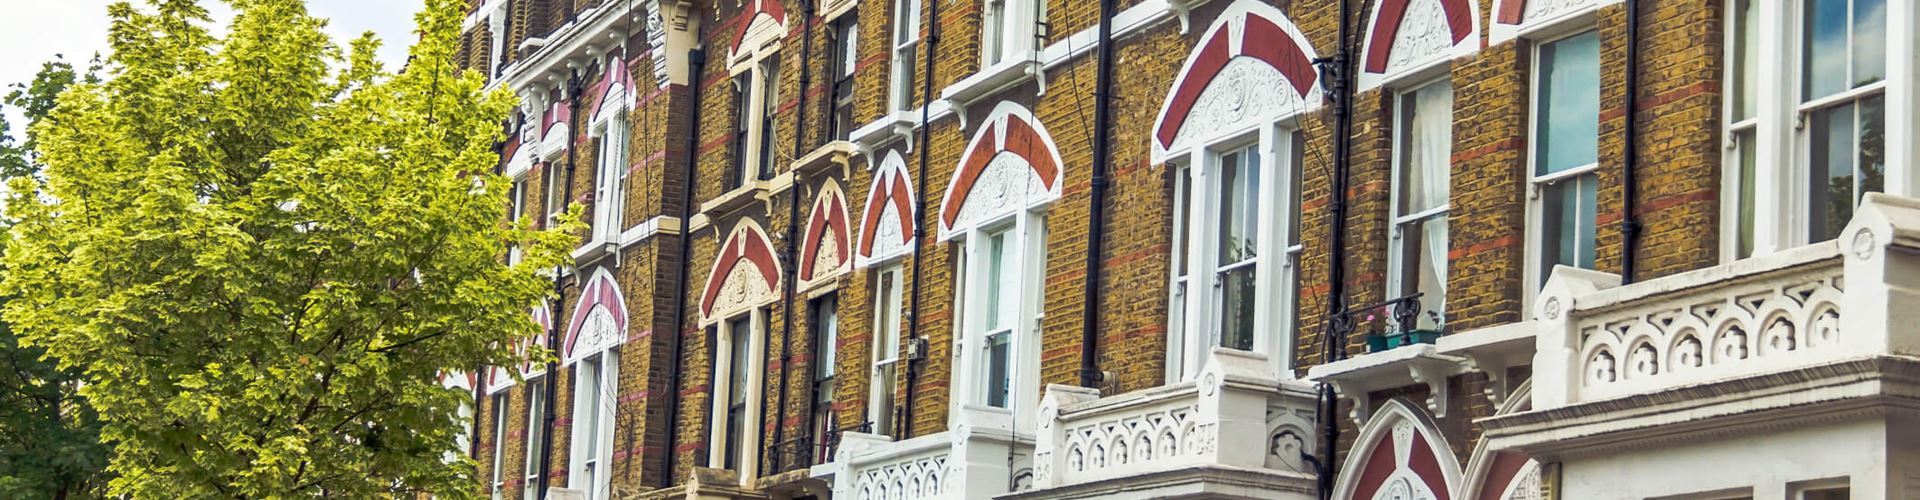 London rent concern for young professionals